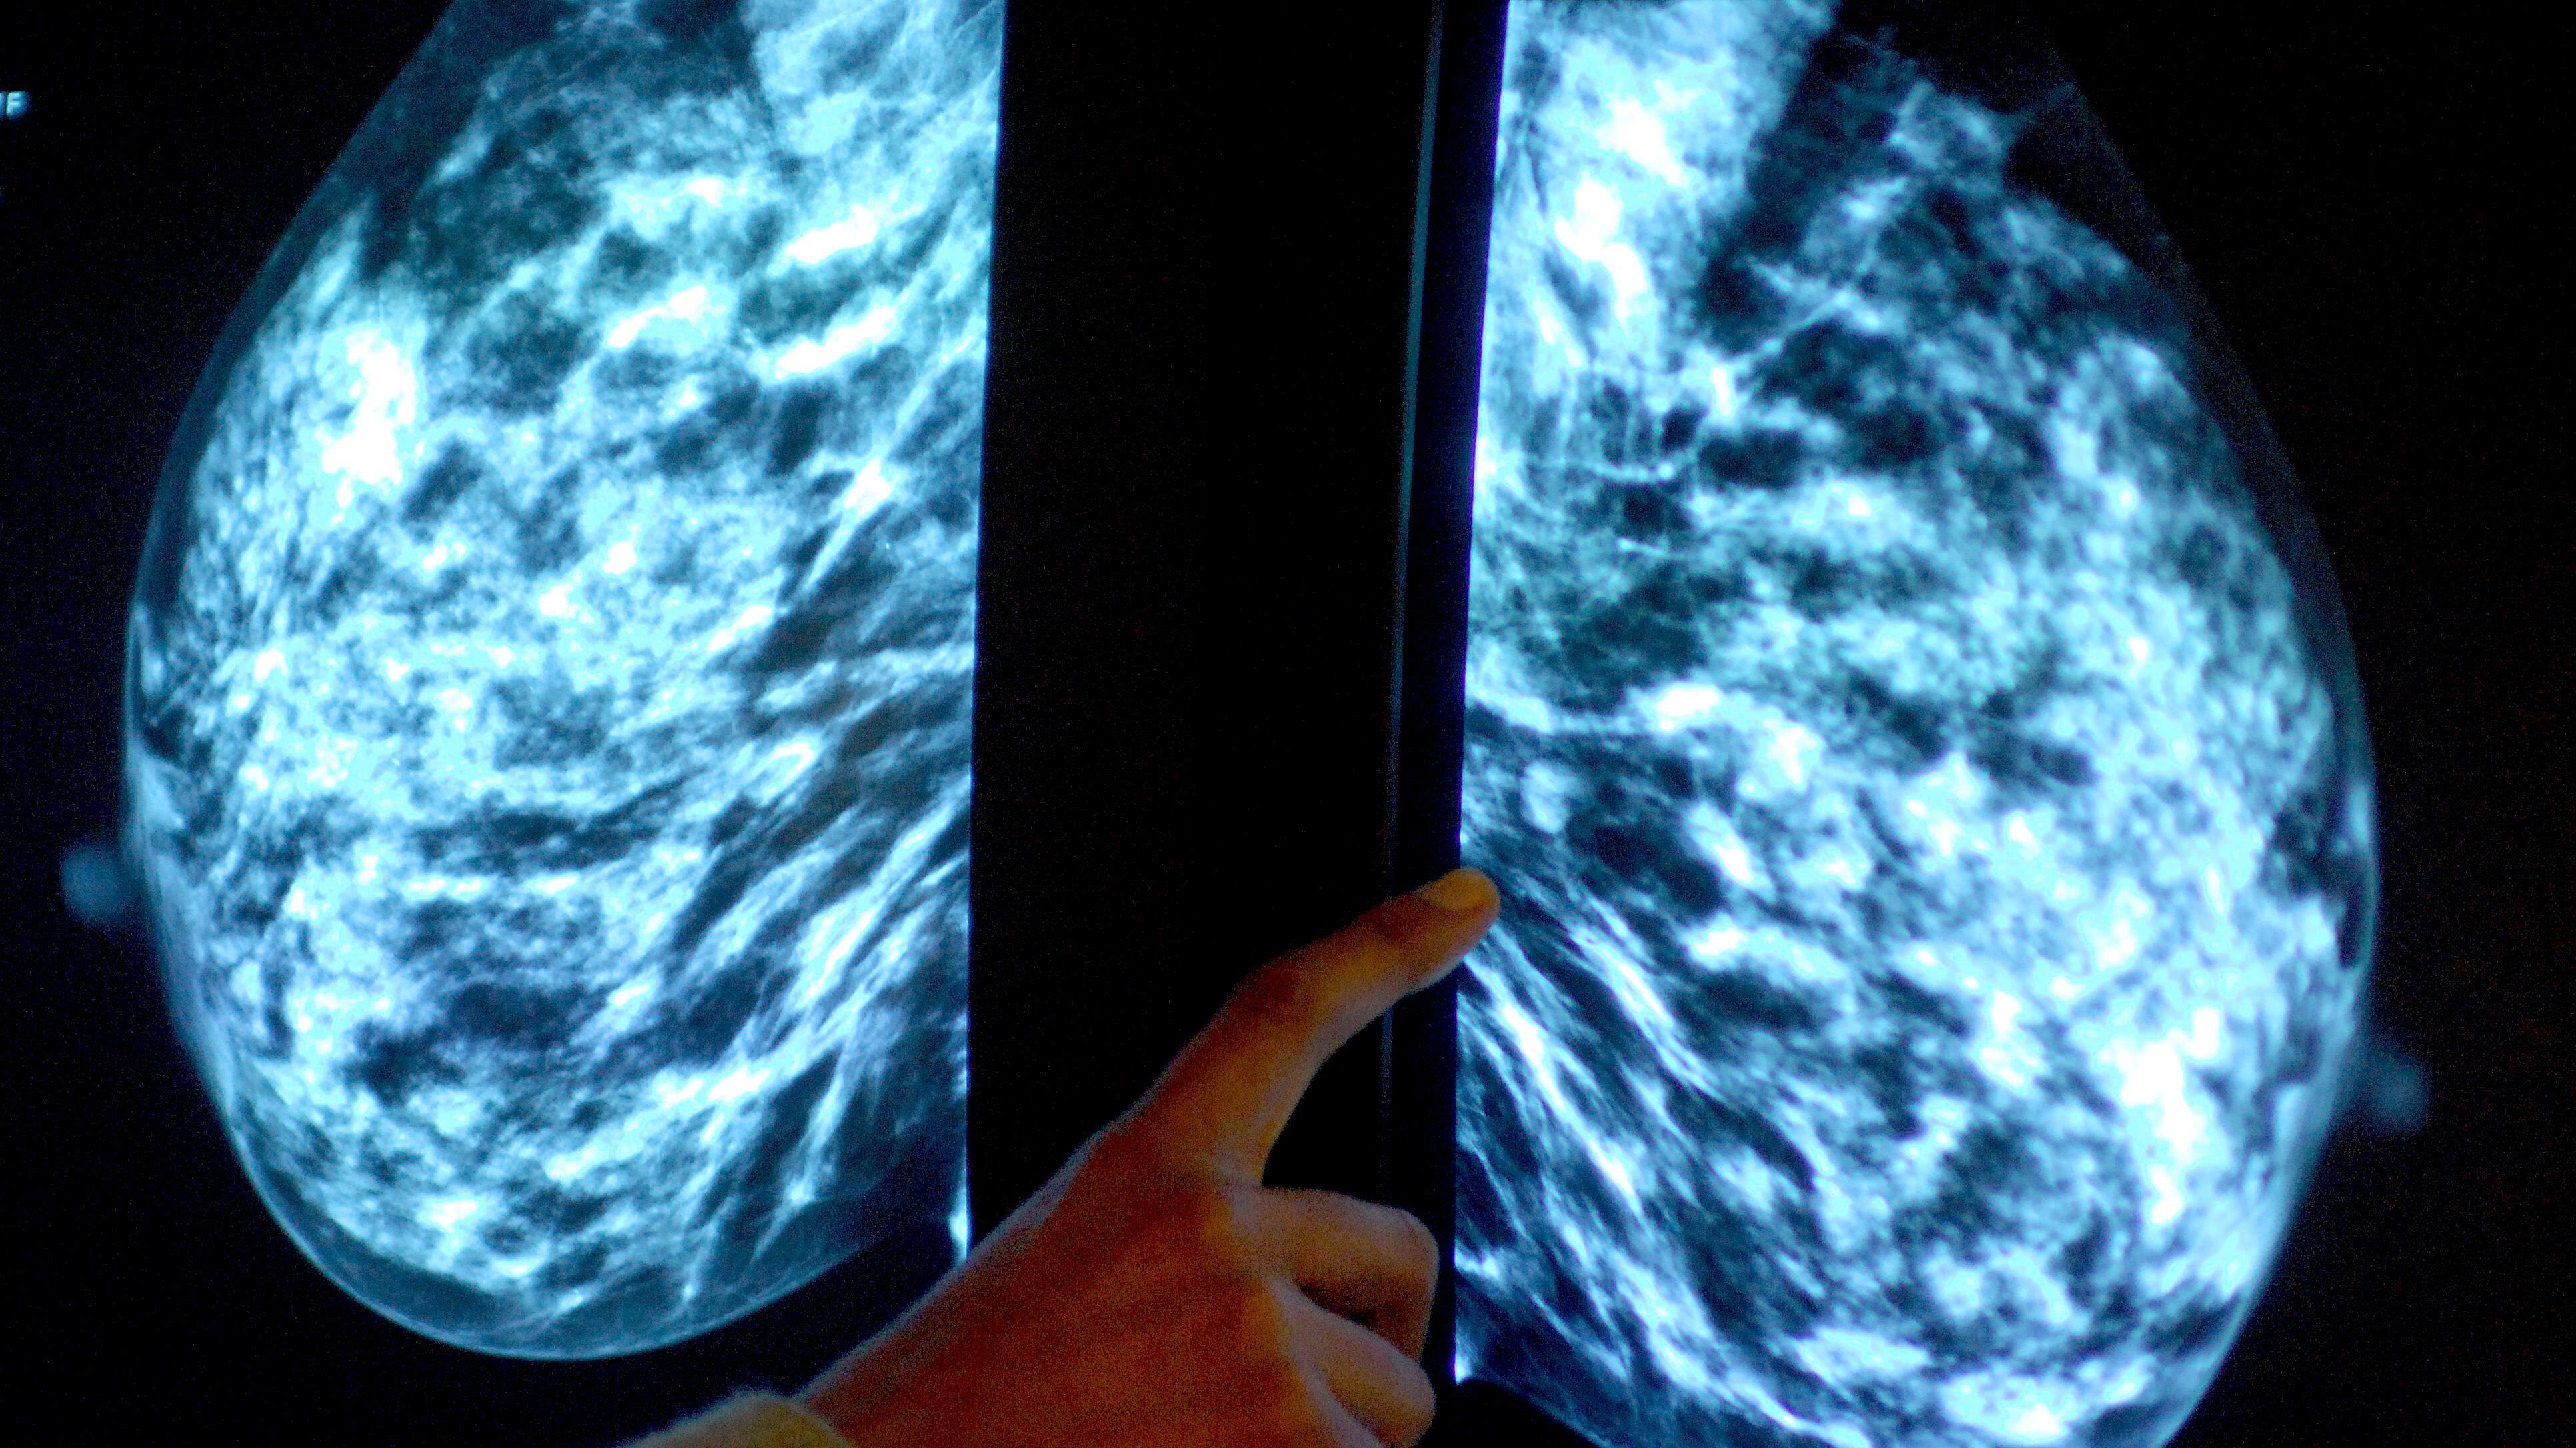 The tests provide information on the genetic makeup of breast cancer tumours